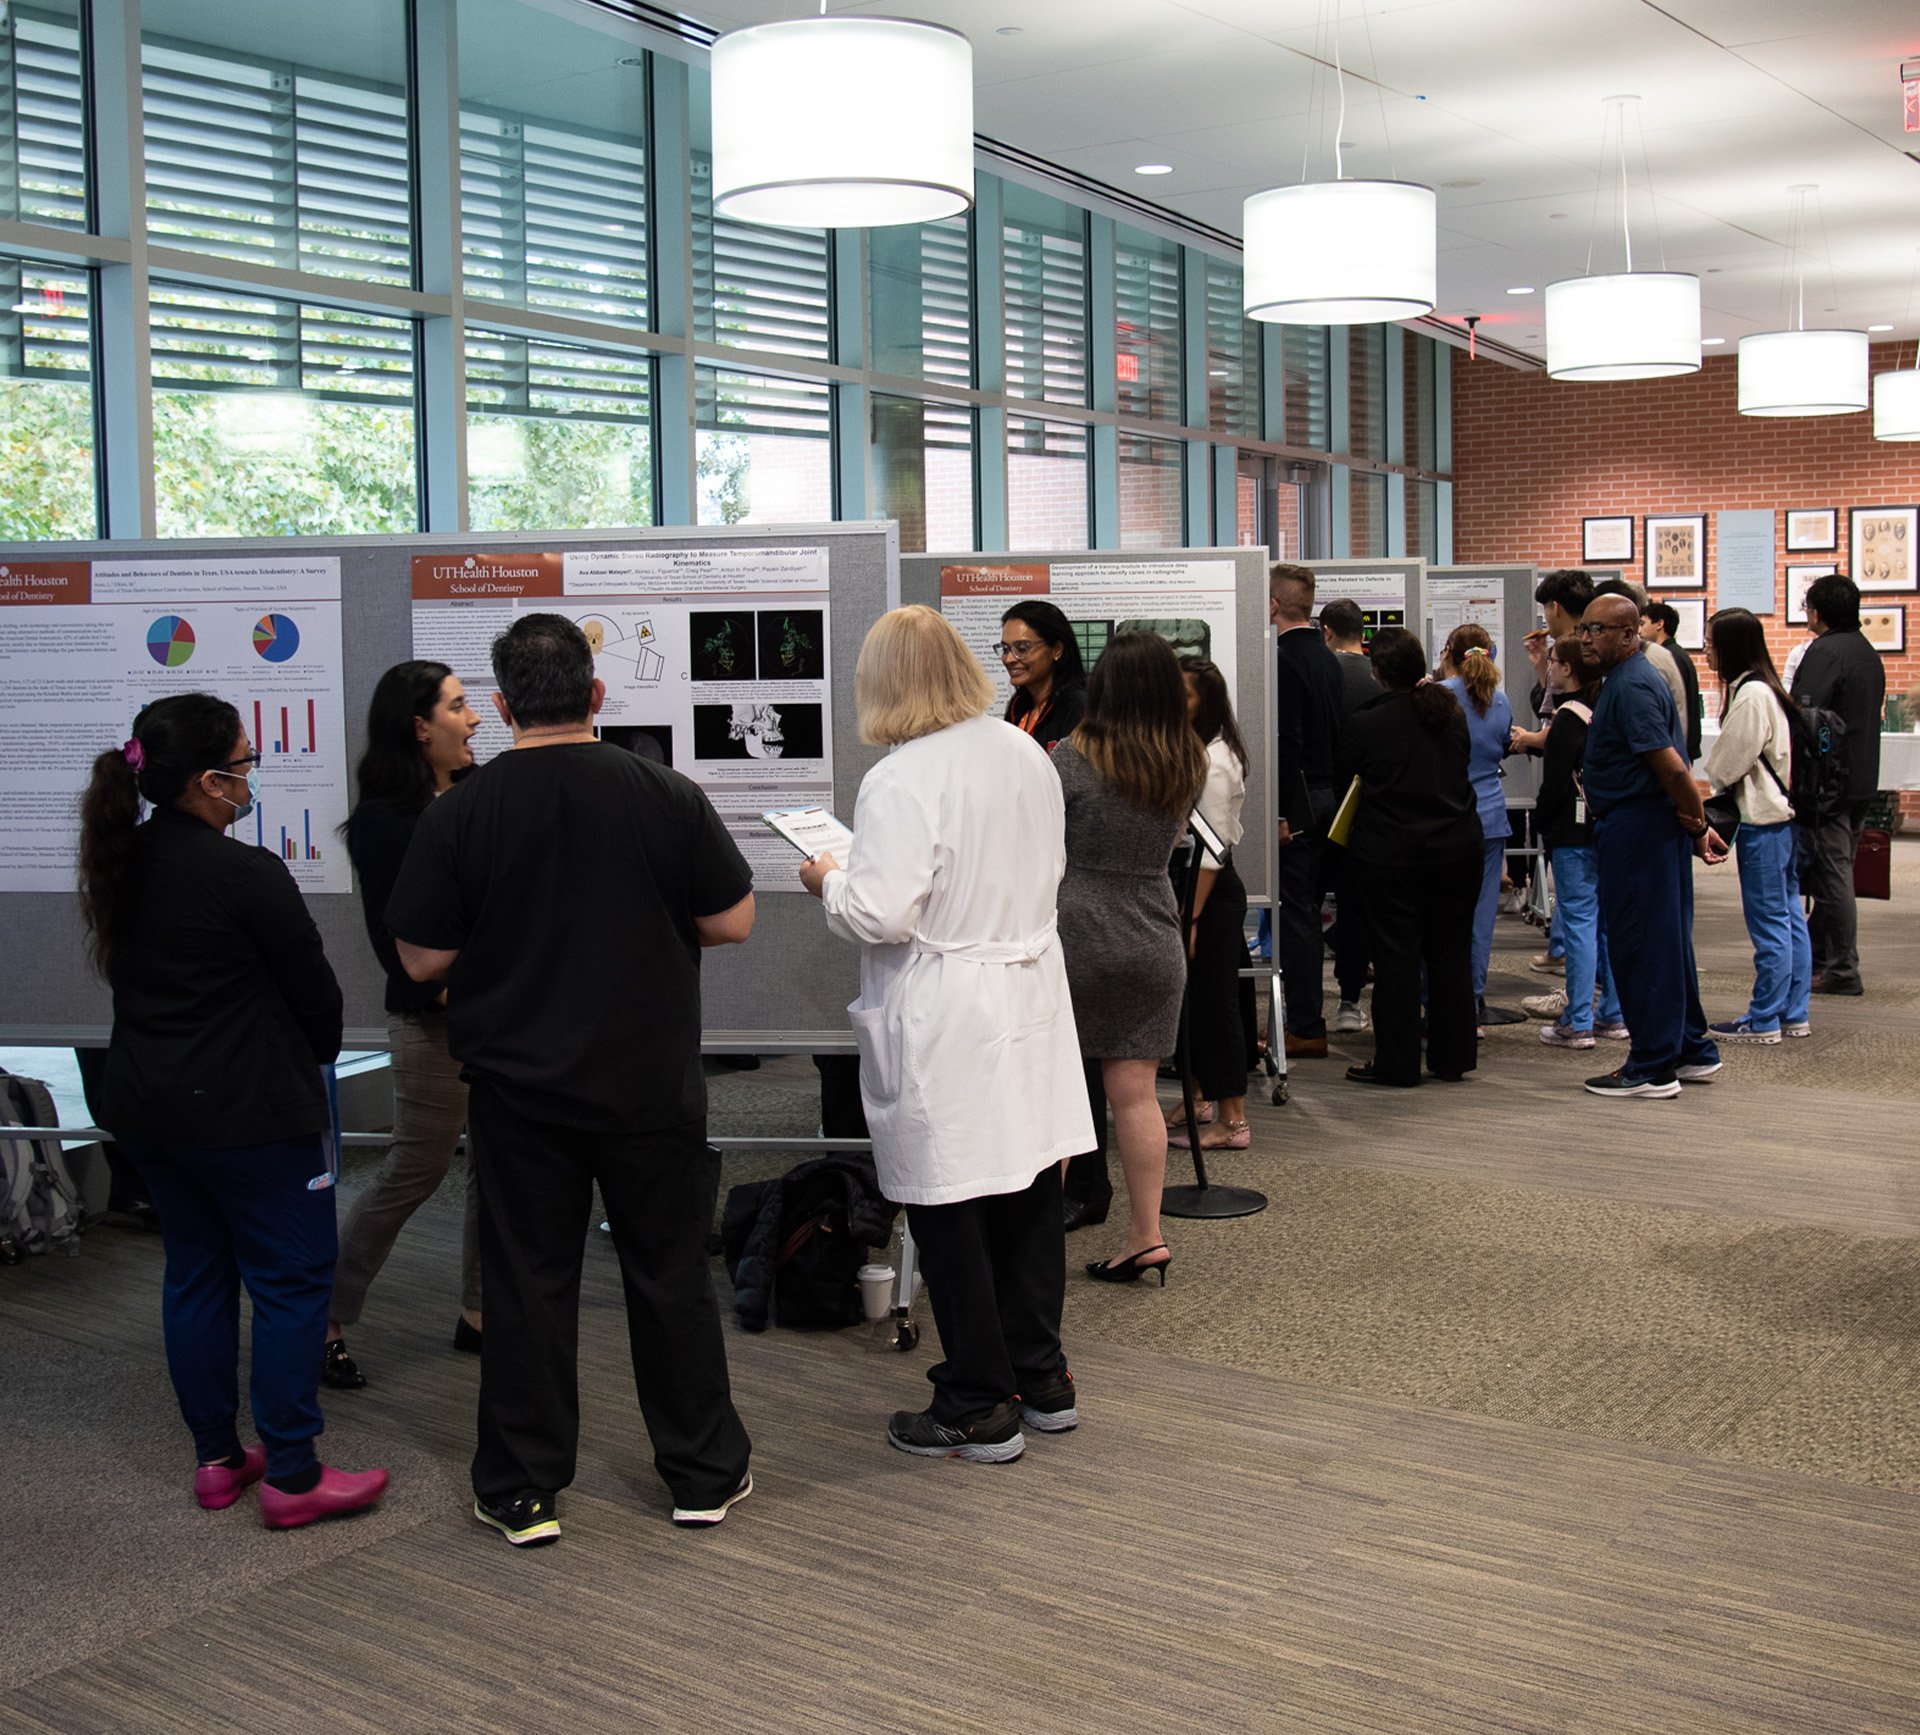 The 13th Annual Student Research Showcase will take place Tuesday, Oct. 31, in the Denton A. Cooley, MD and Ralph C. Cooley, DDS University Life Center.